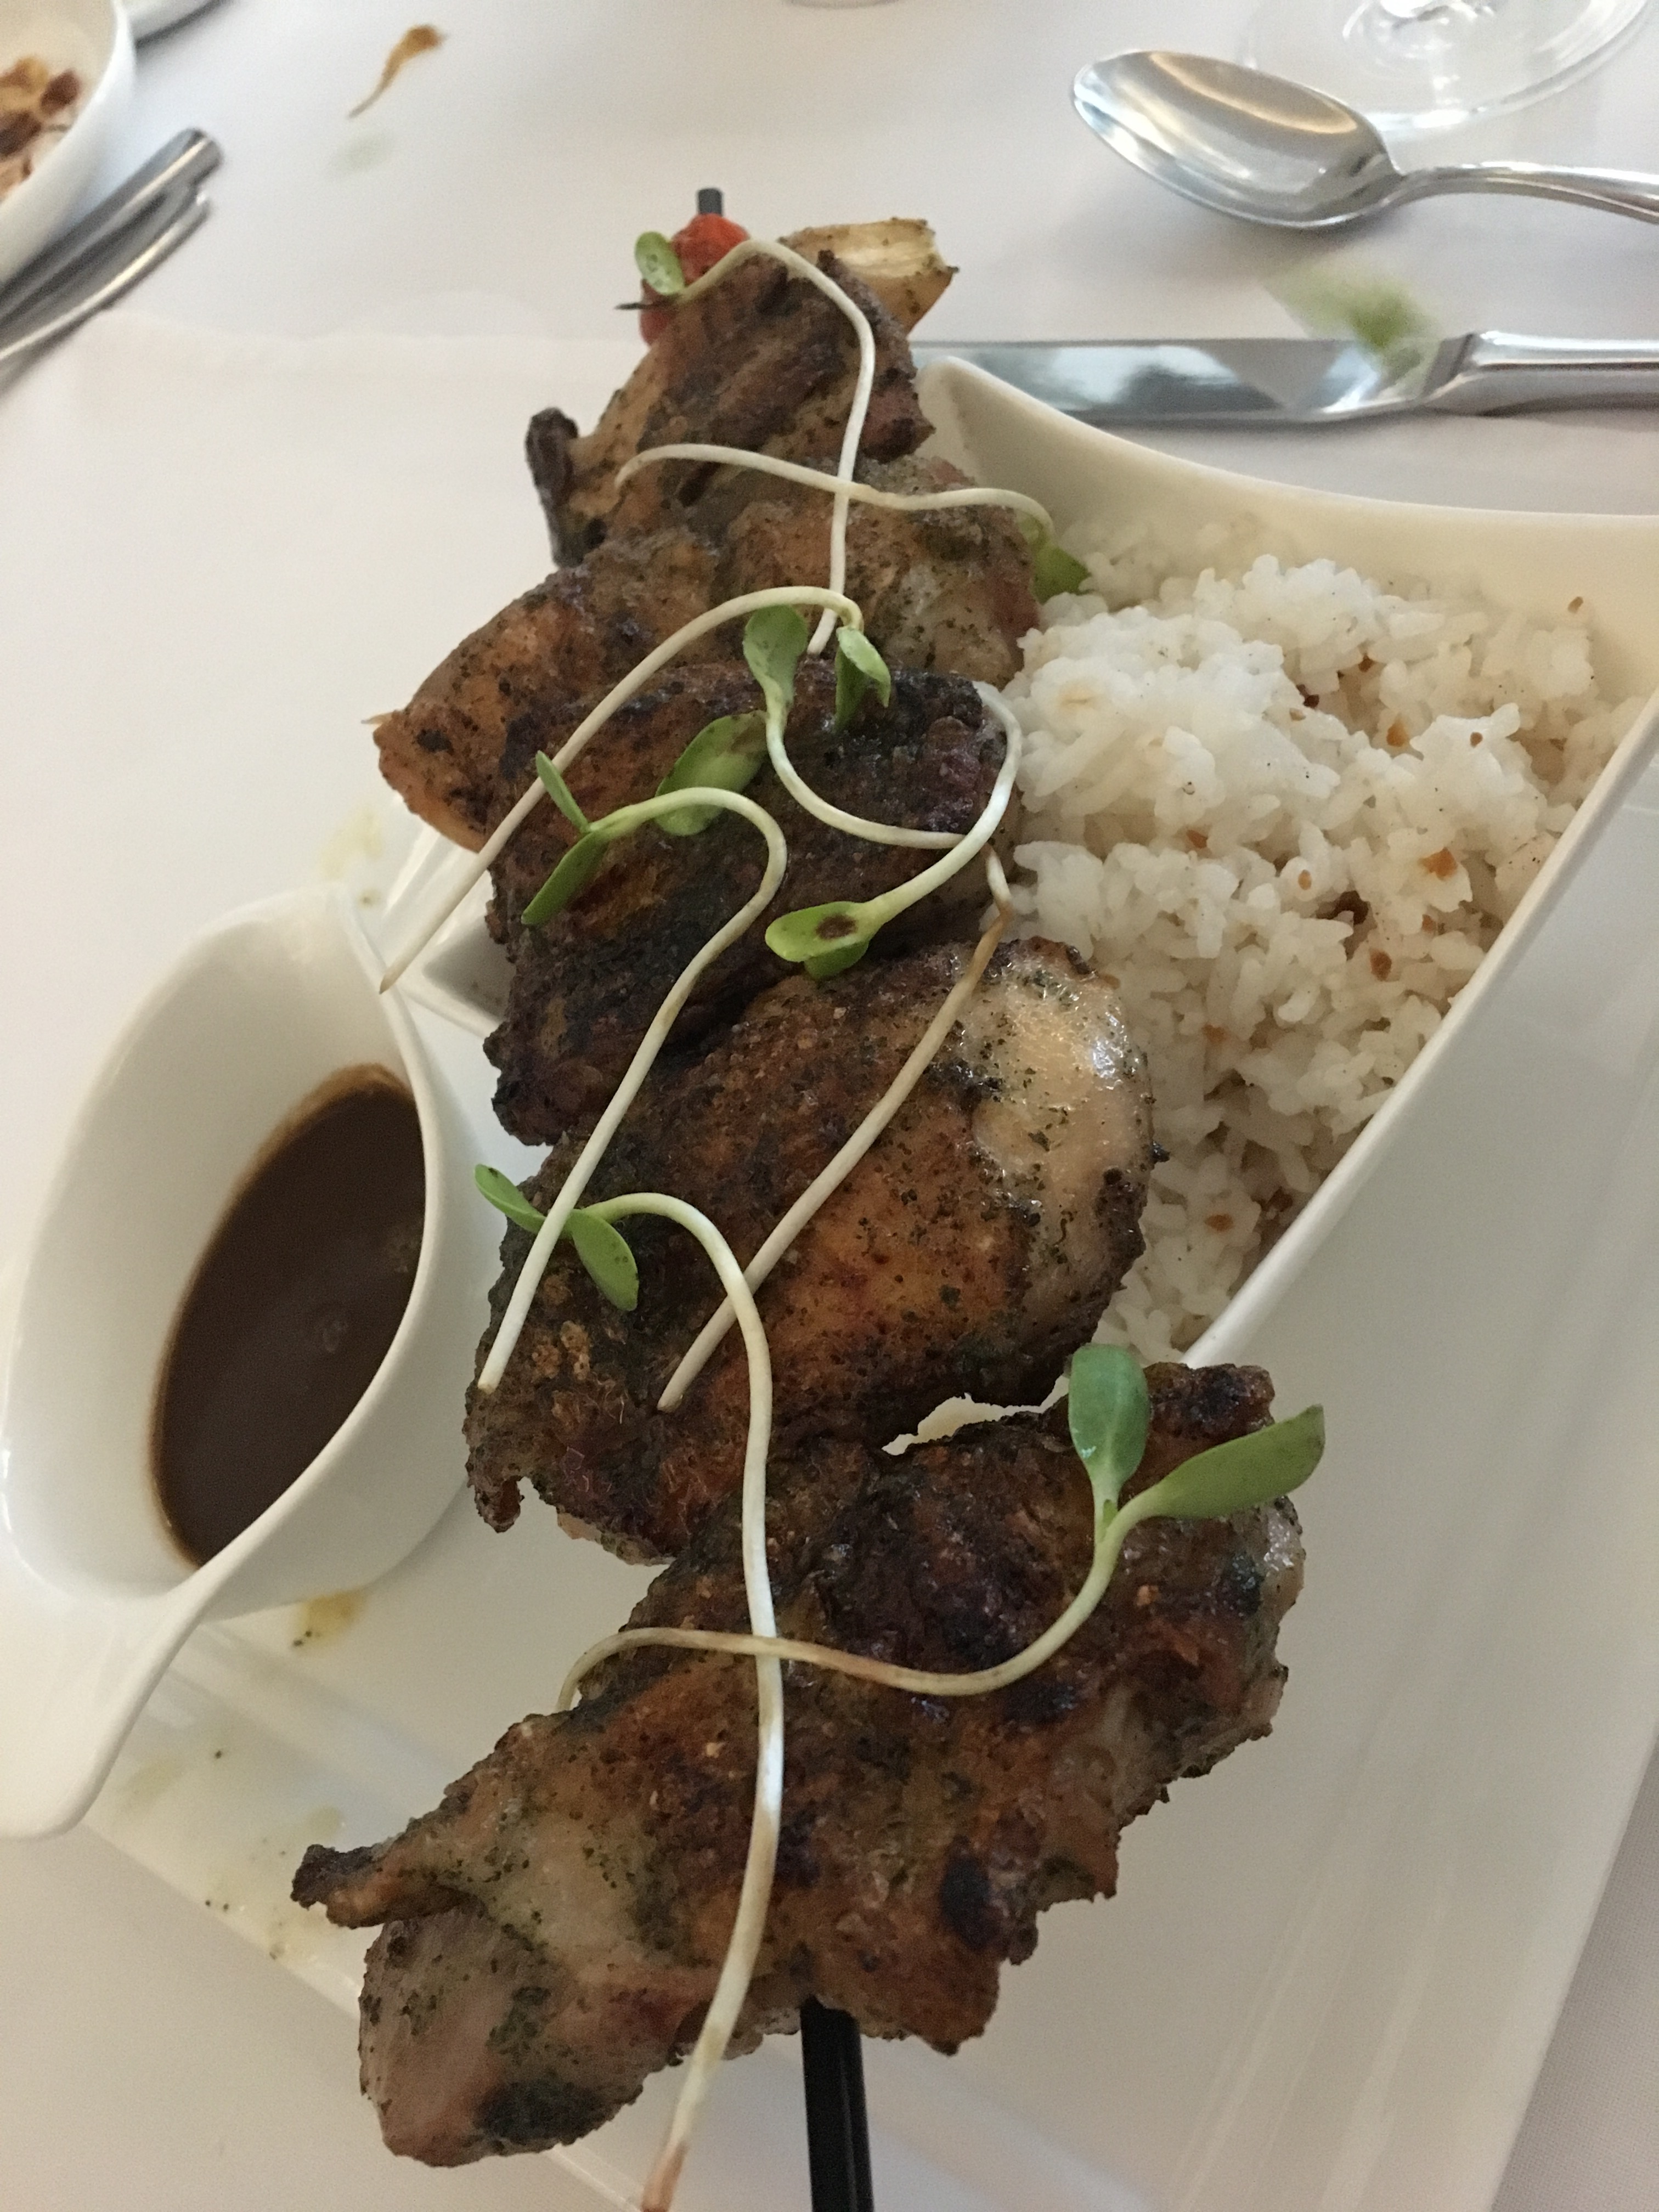 Boneless grilled chicken chunks on a skewer with rice